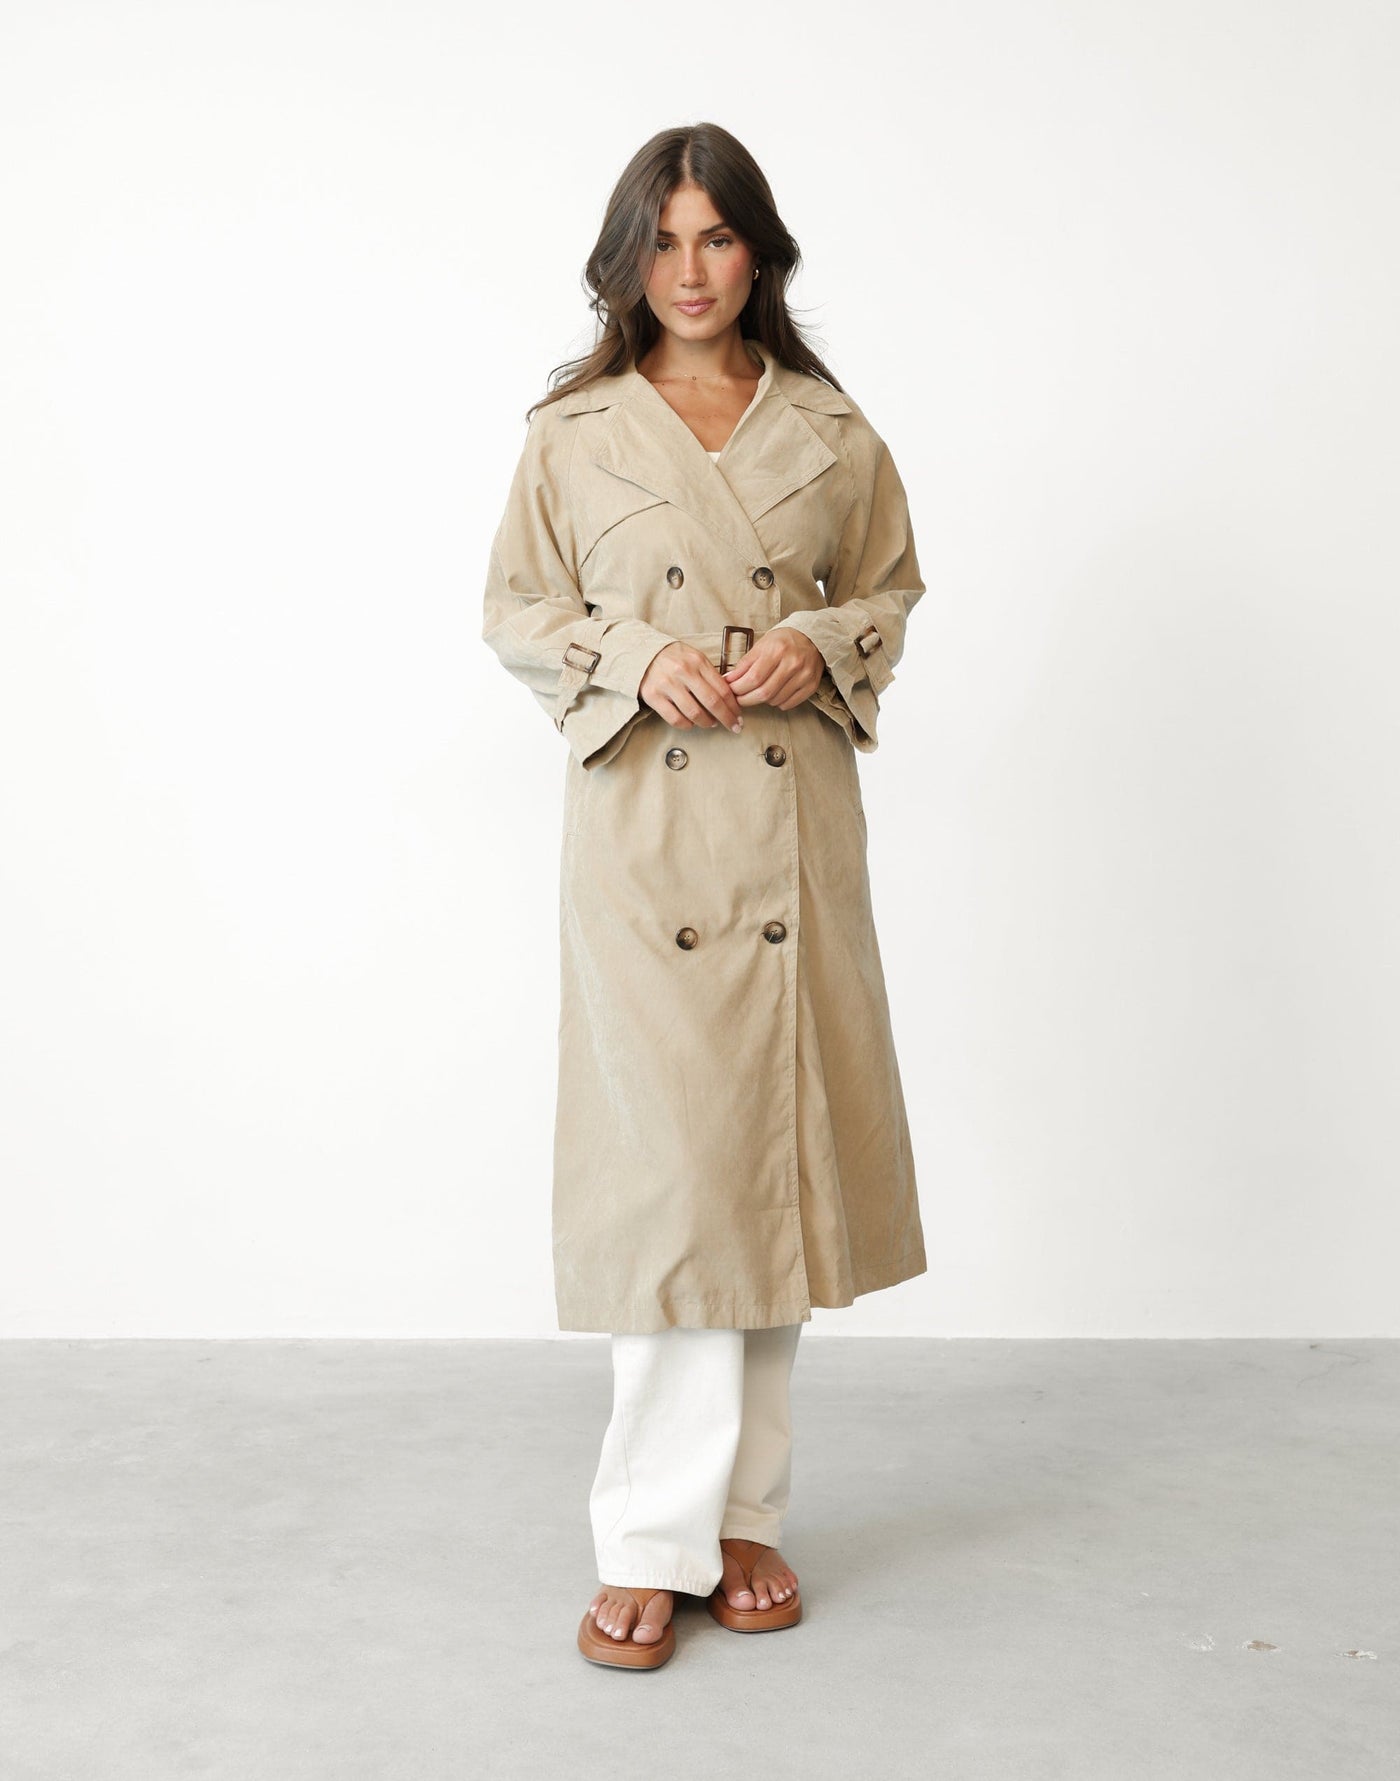 Izaiah Trench Coat (Beige) - Full Length Trench Coat with Waist Tie - Women's Outerwear - Charcoal Clothing